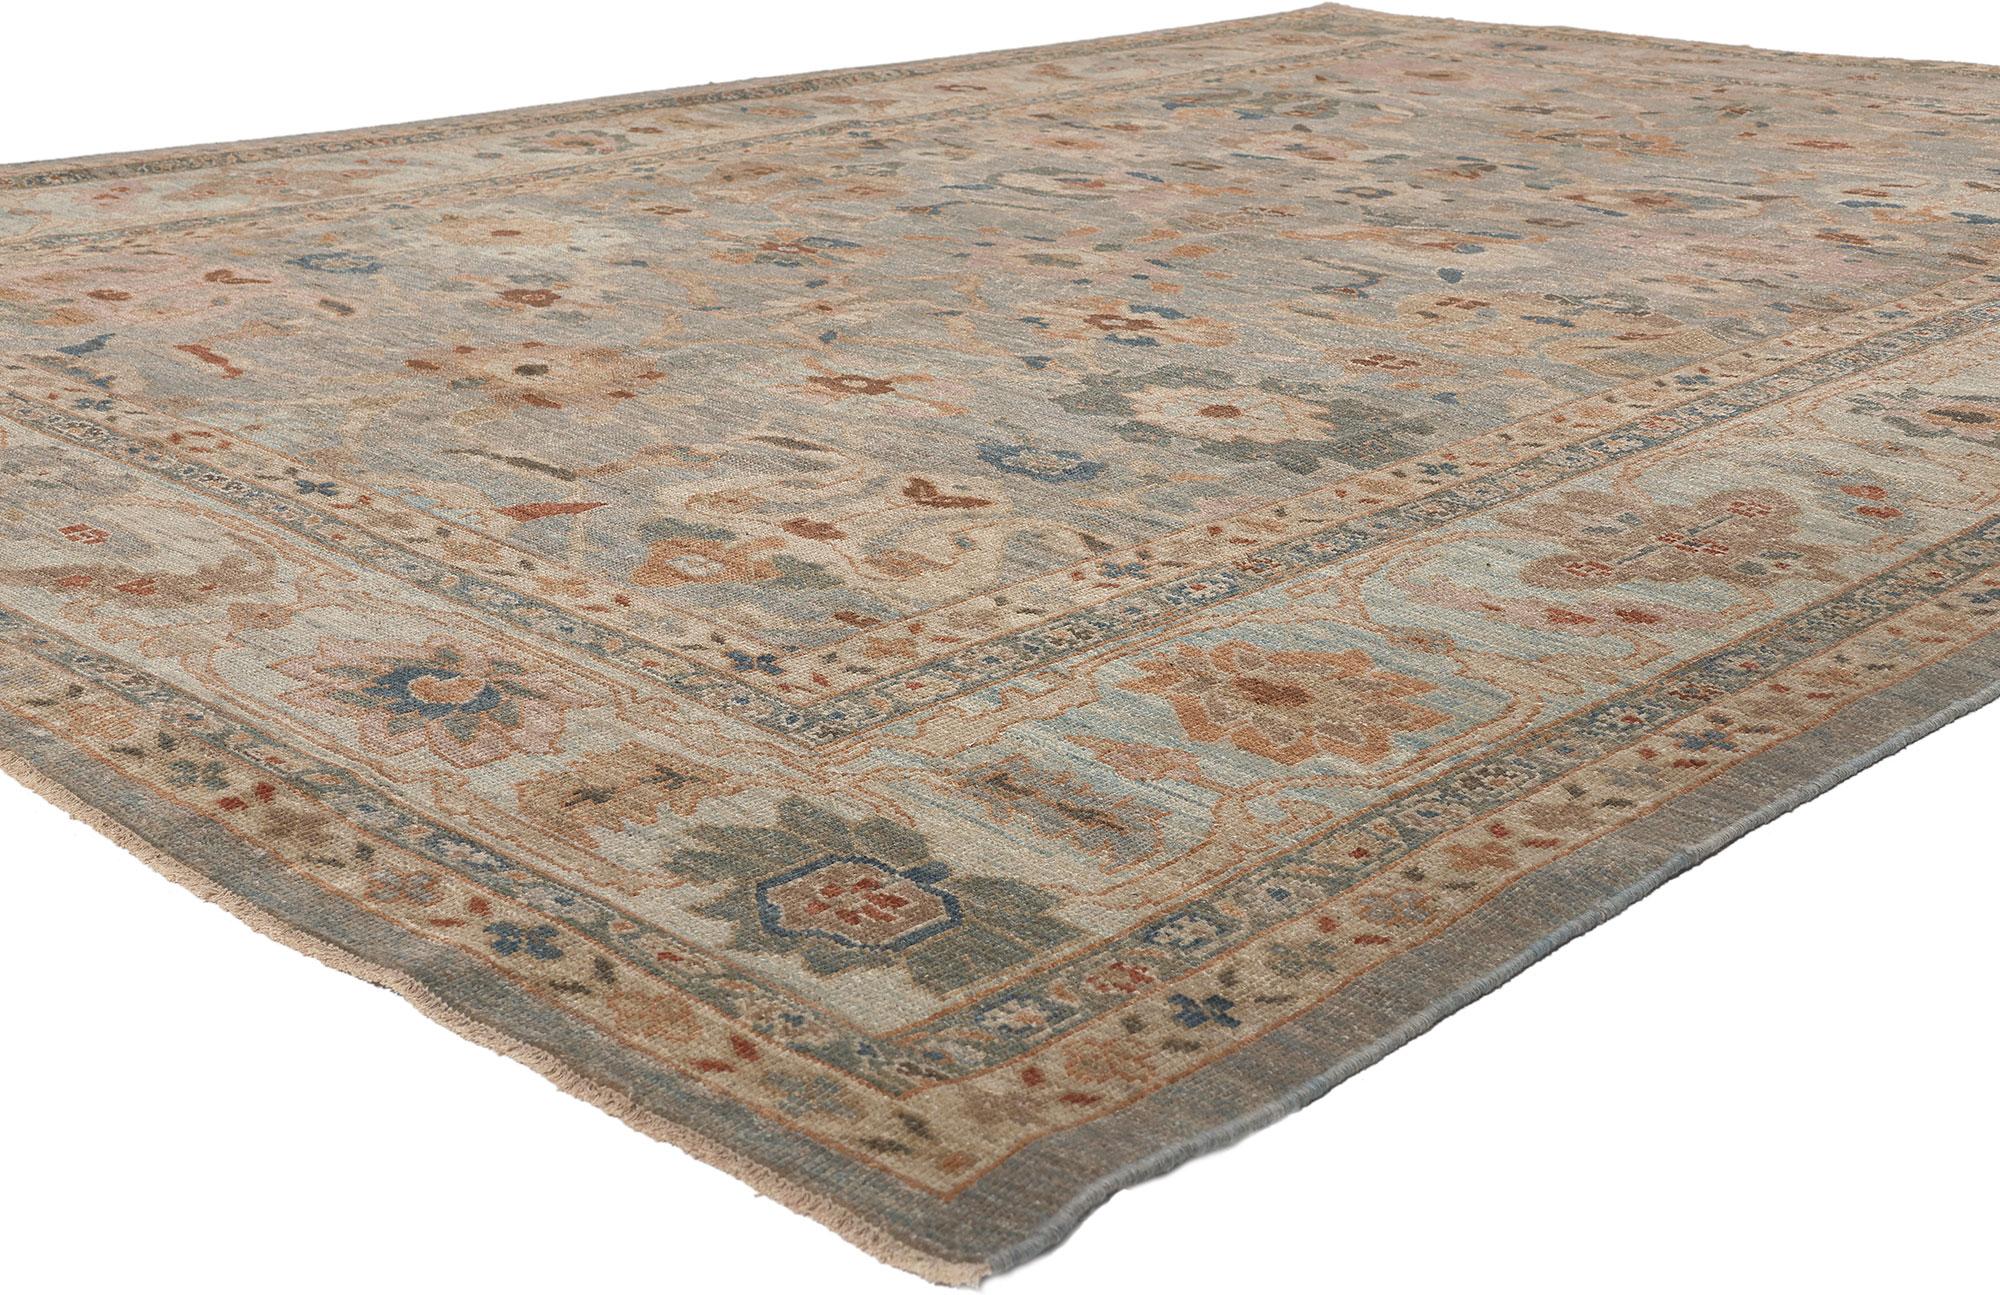 60700 Modern Persian Sultanabad Rug, 08'07 x 12'00.
Modern style meets organic luxe in this hand knotted wool Persian Sultanabad rug. The nature-inspired design and earth-tone colors woven into this piece work together creating a high-end look with